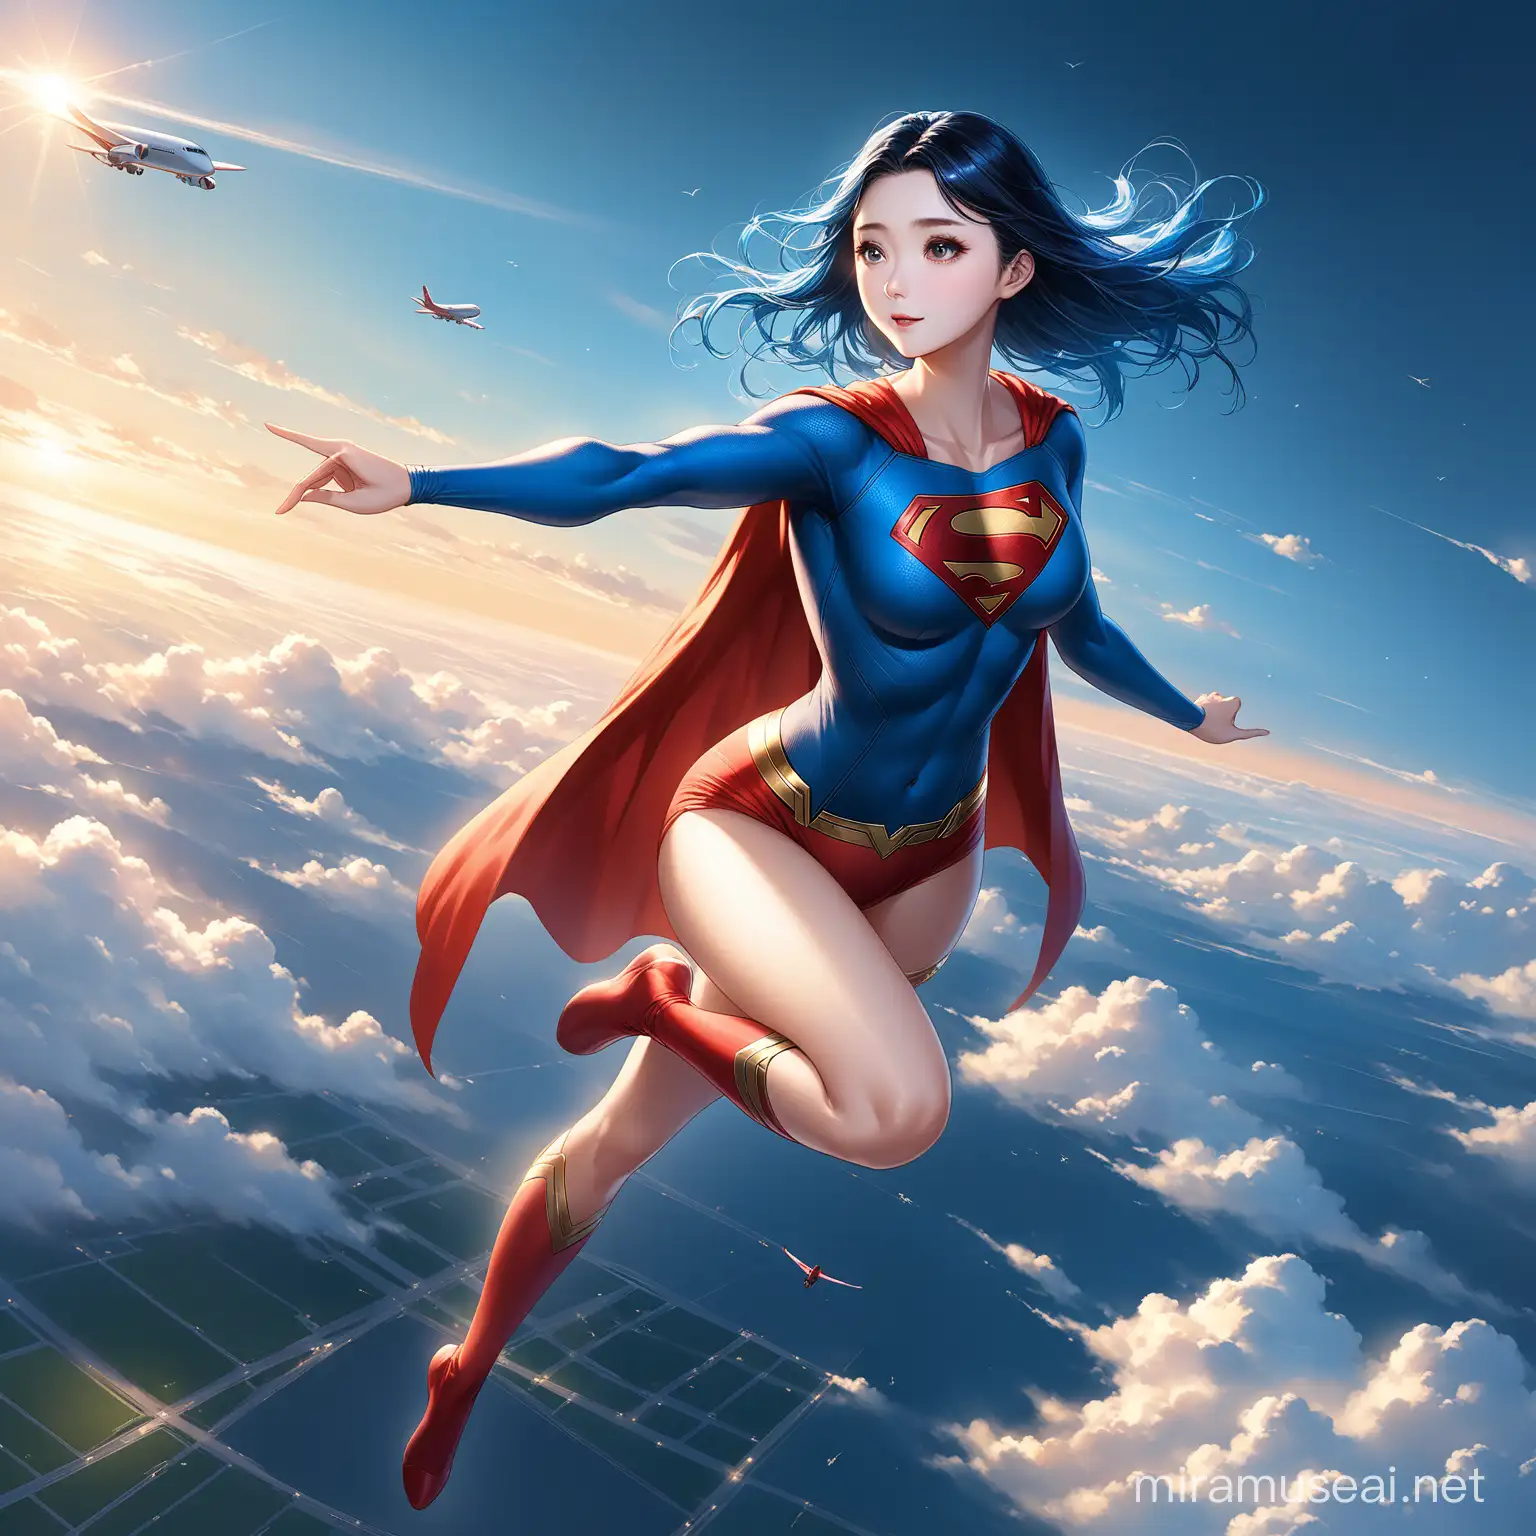 Superwoman Fan Bingbing Flying Out of Airplane with Superman Outfit